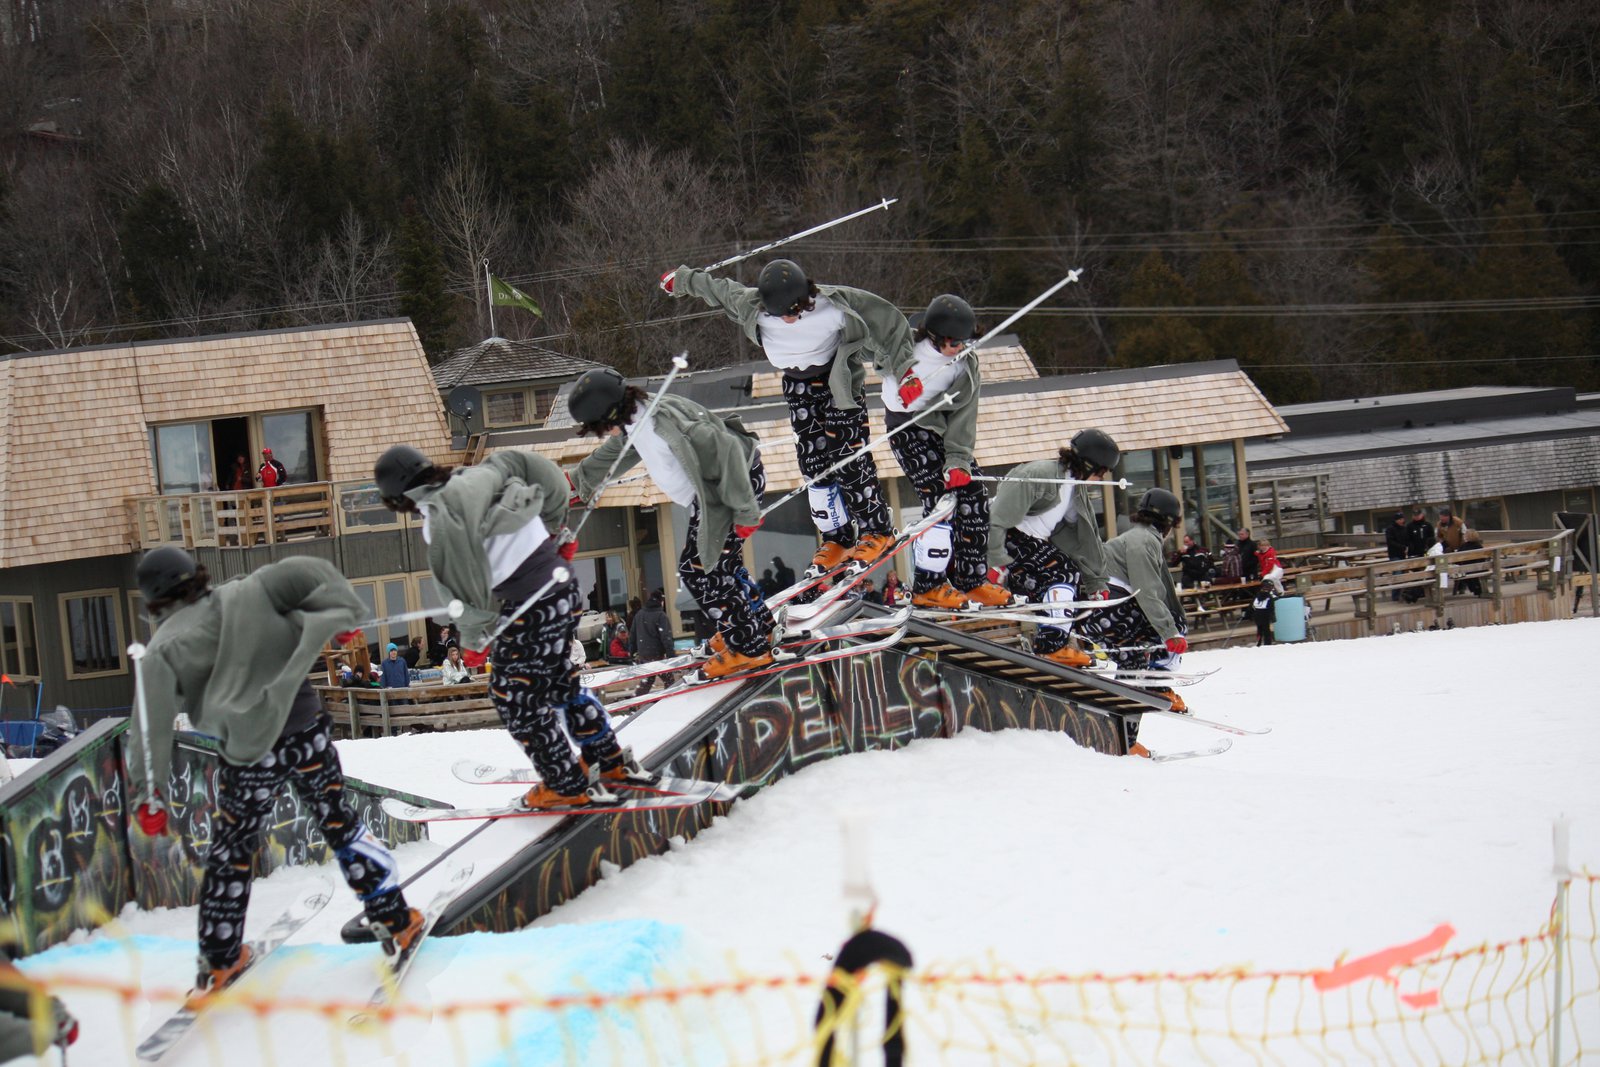 Switchin it up at the Rail Jam